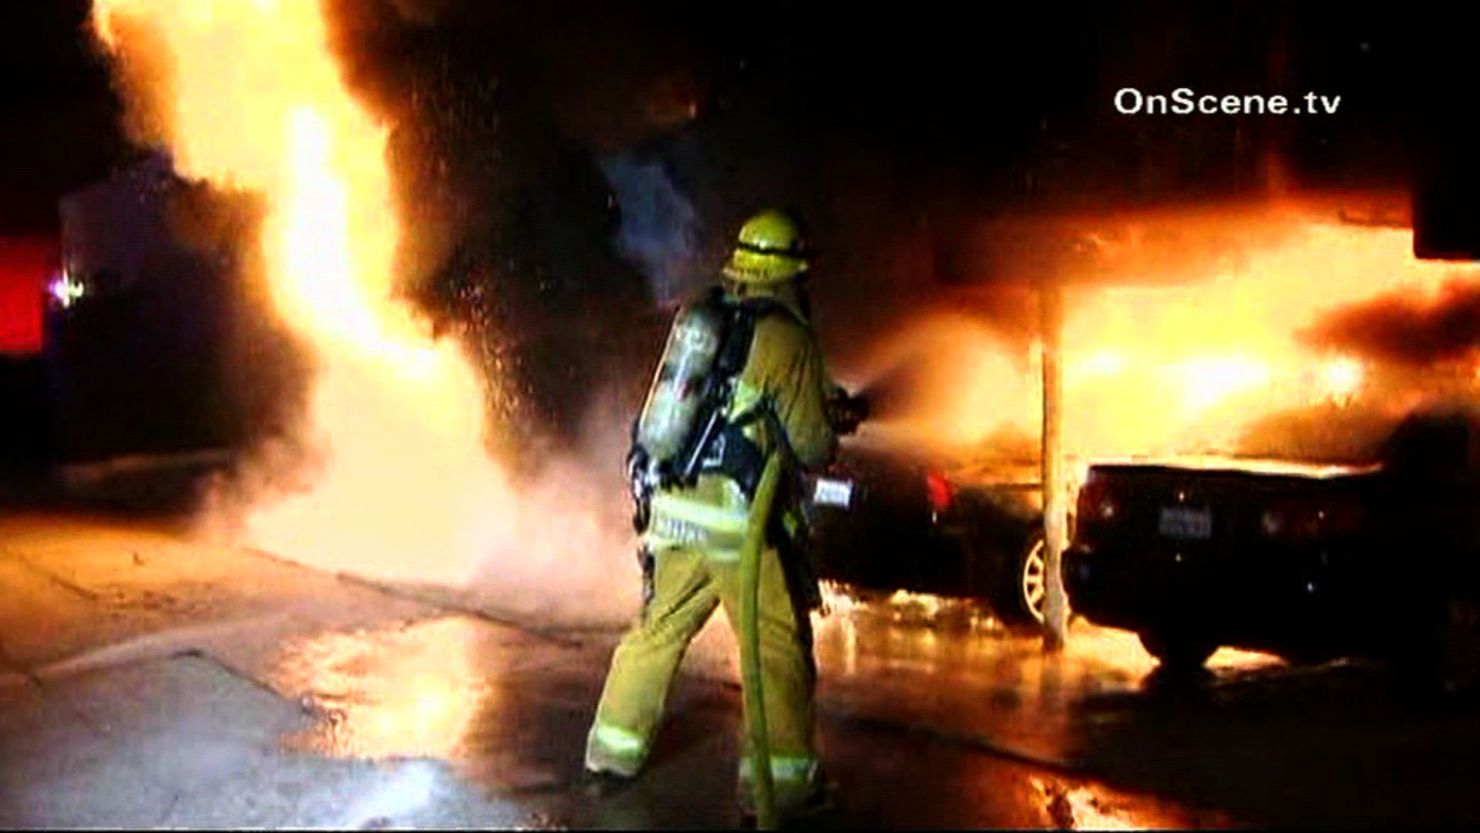 Officials are offering a $60,000 reward for information leading to an arrest in the arson spree in the Hollywood area.